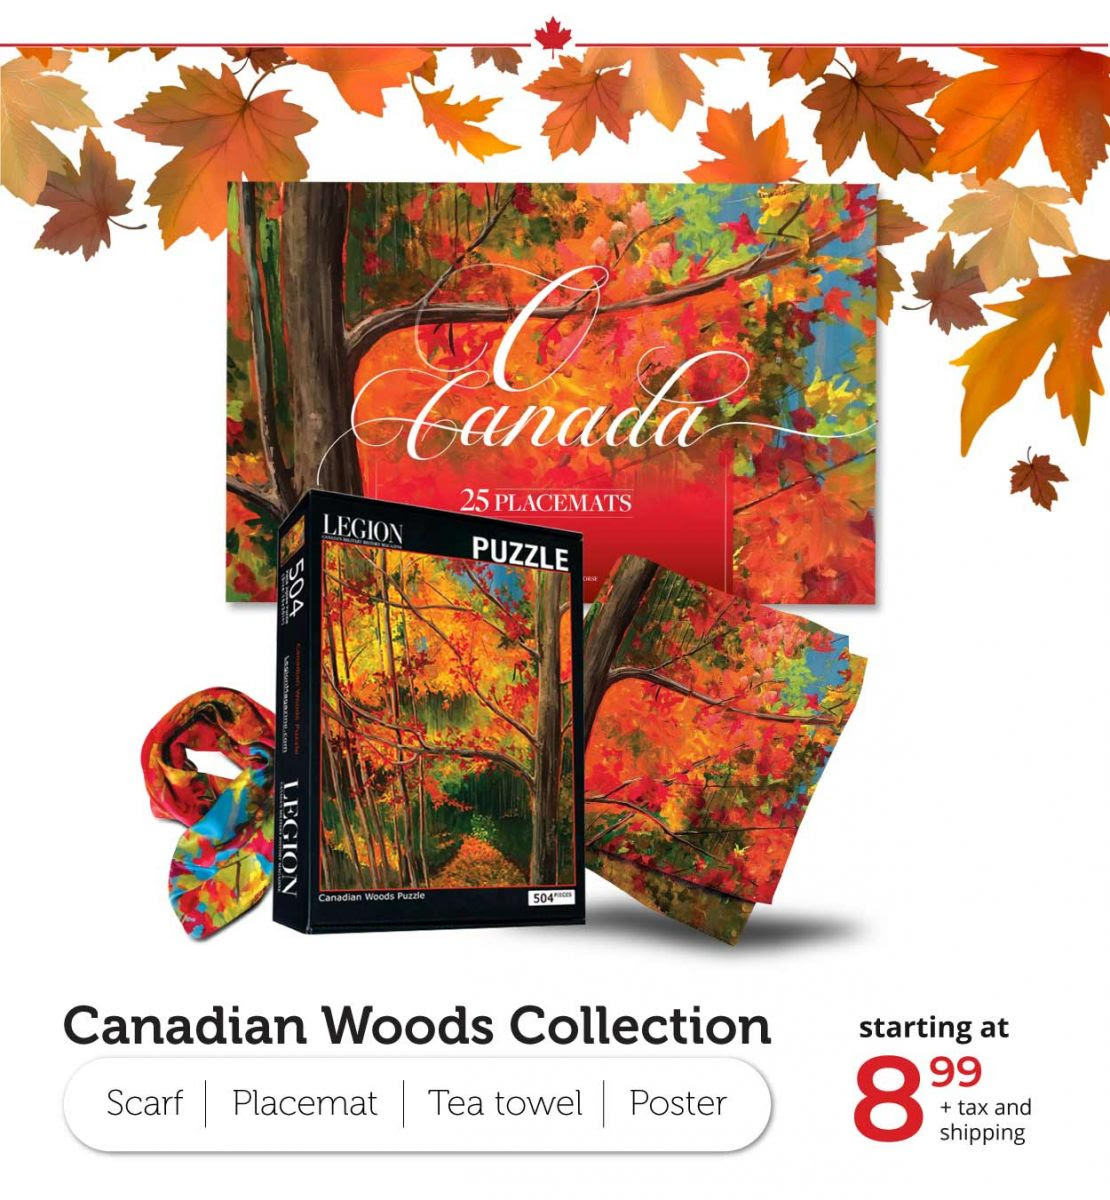 Canadian Woods Collection